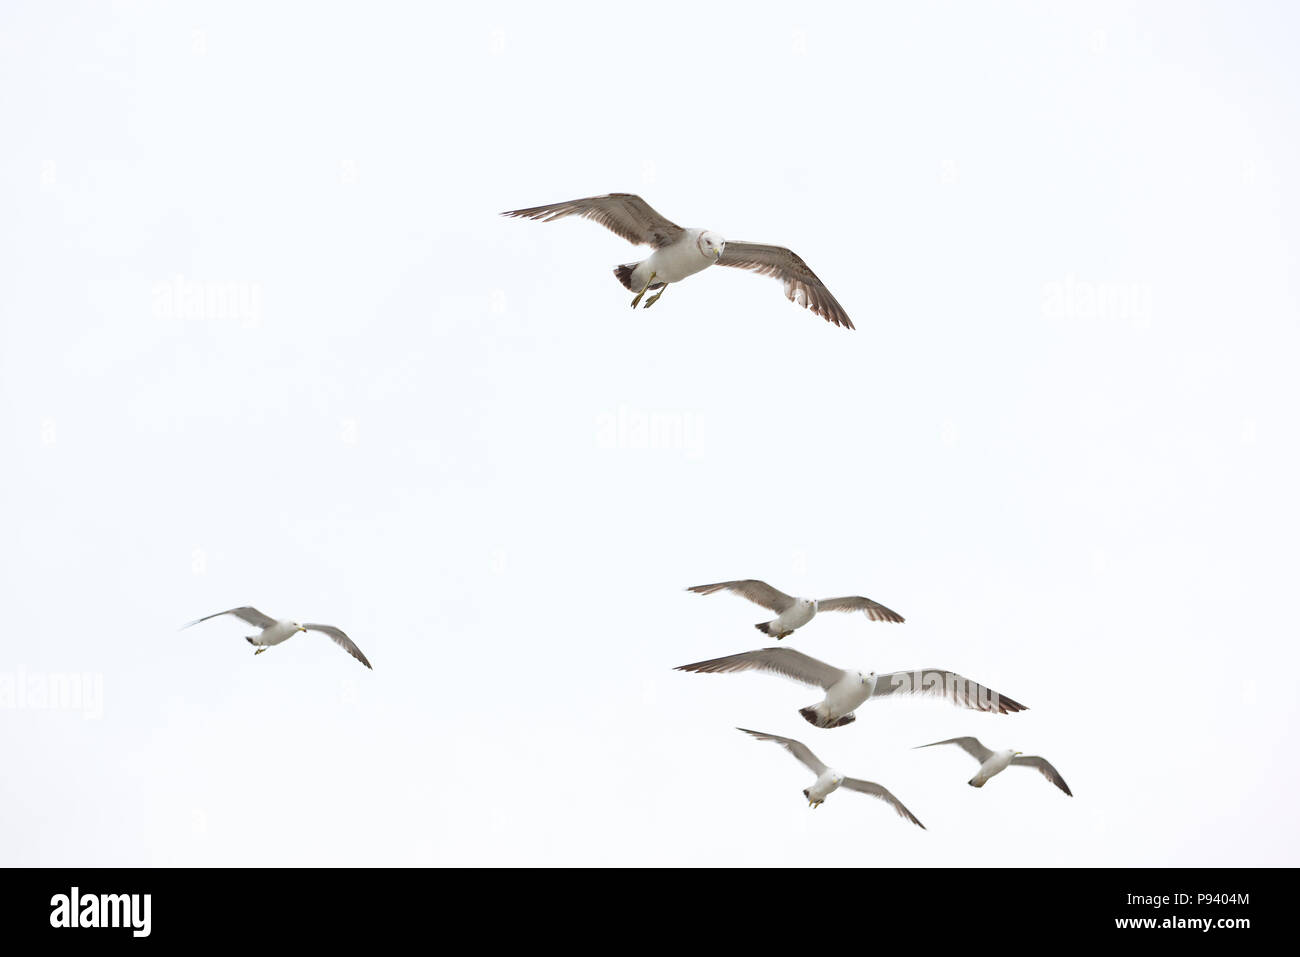 A squabble of seagulls flying, isolated on white background. Stock Photo